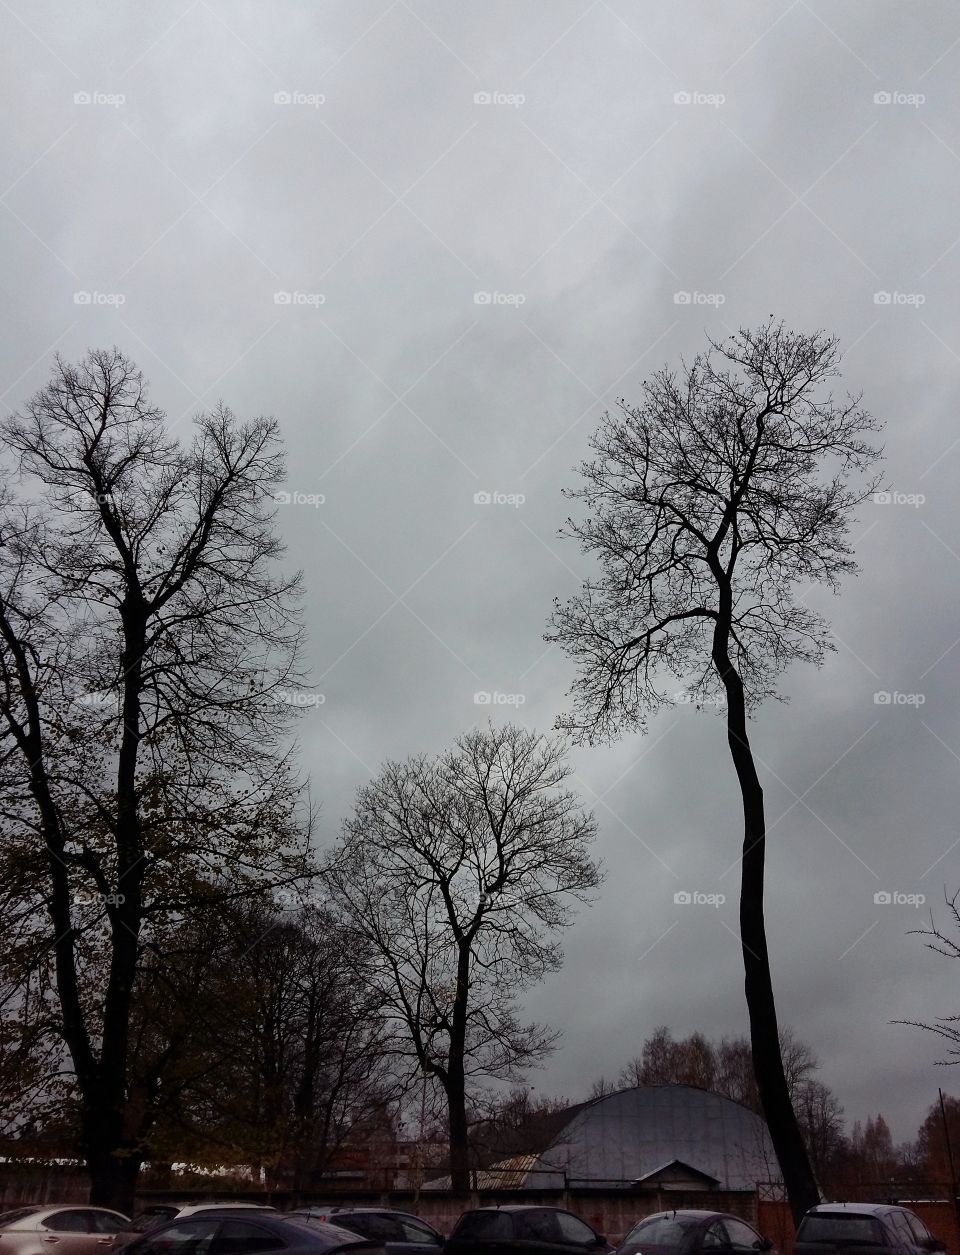 Dark tree silhouettes on an overcast day